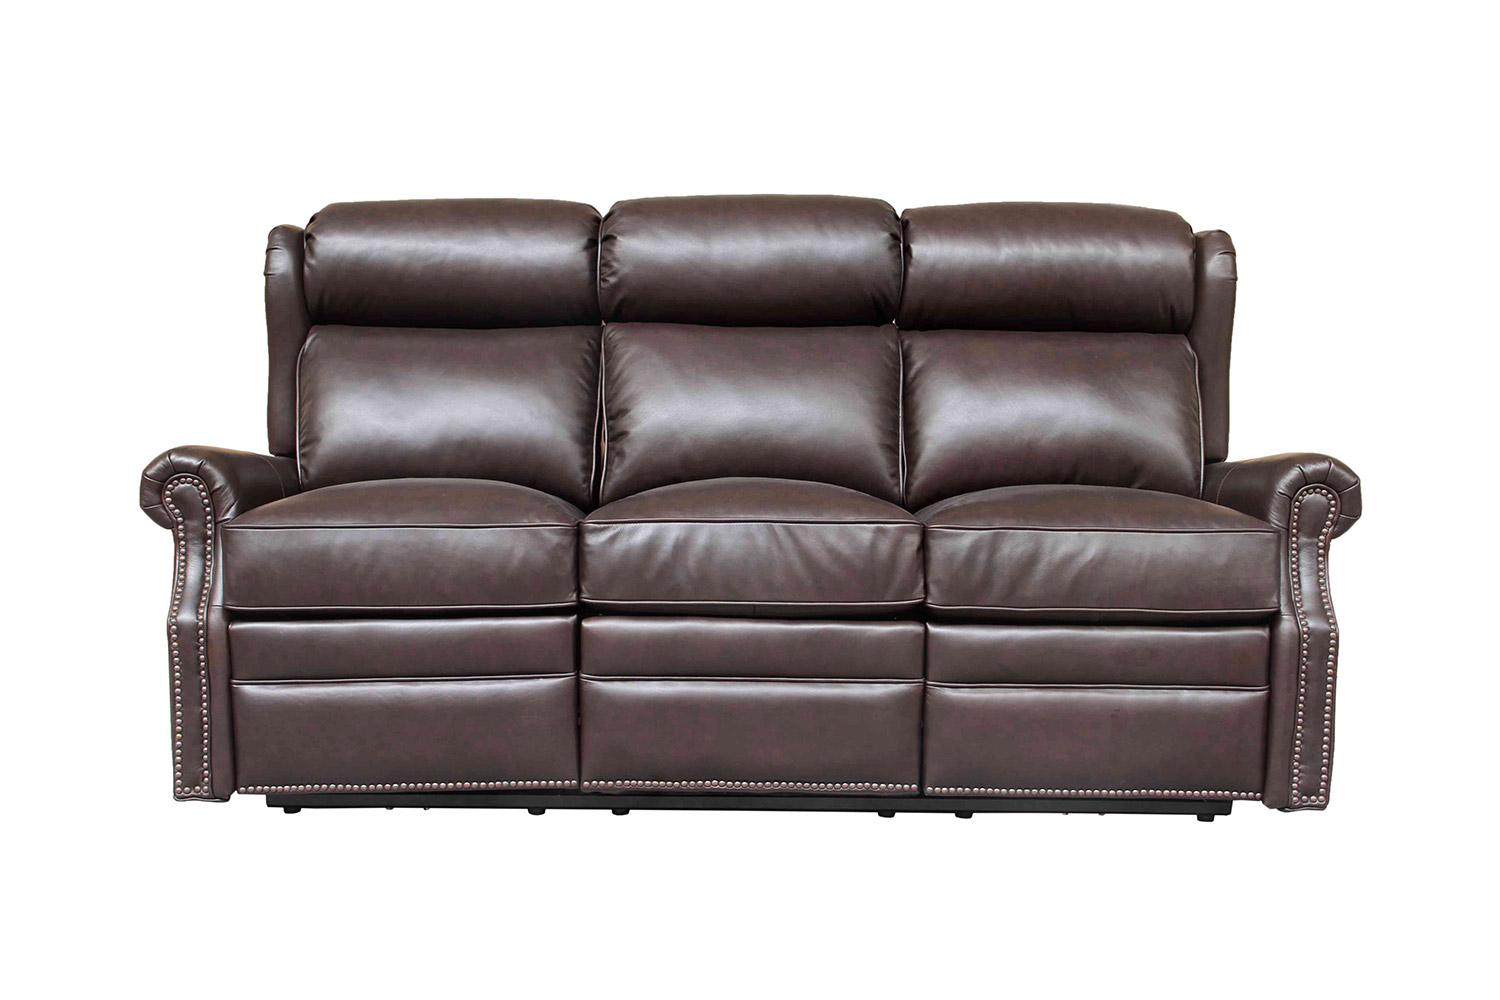 Barcalounger Southington Power Reclining Sofa with Power Head Rests - Shoreham Dark Umber/All Leather